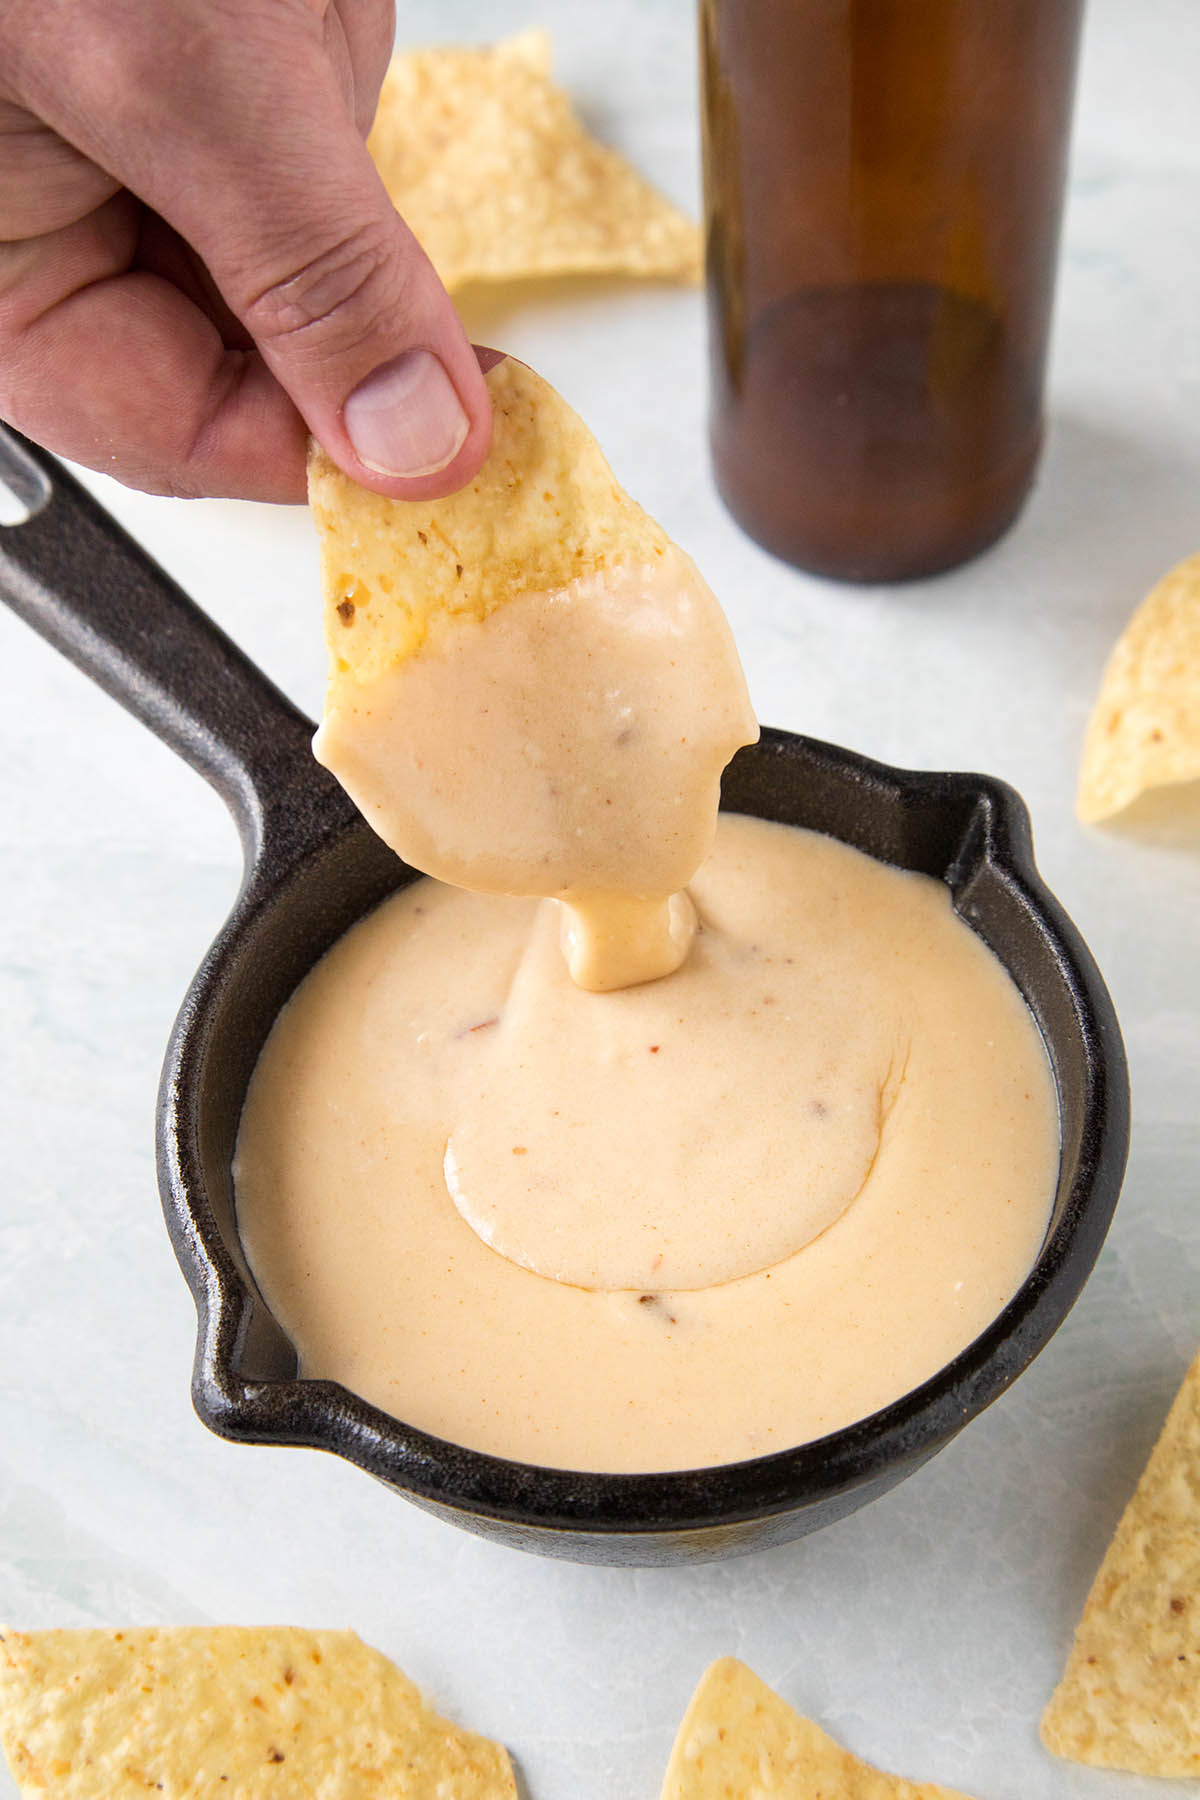 Dipping a chip into our Creamy Beer Cheese